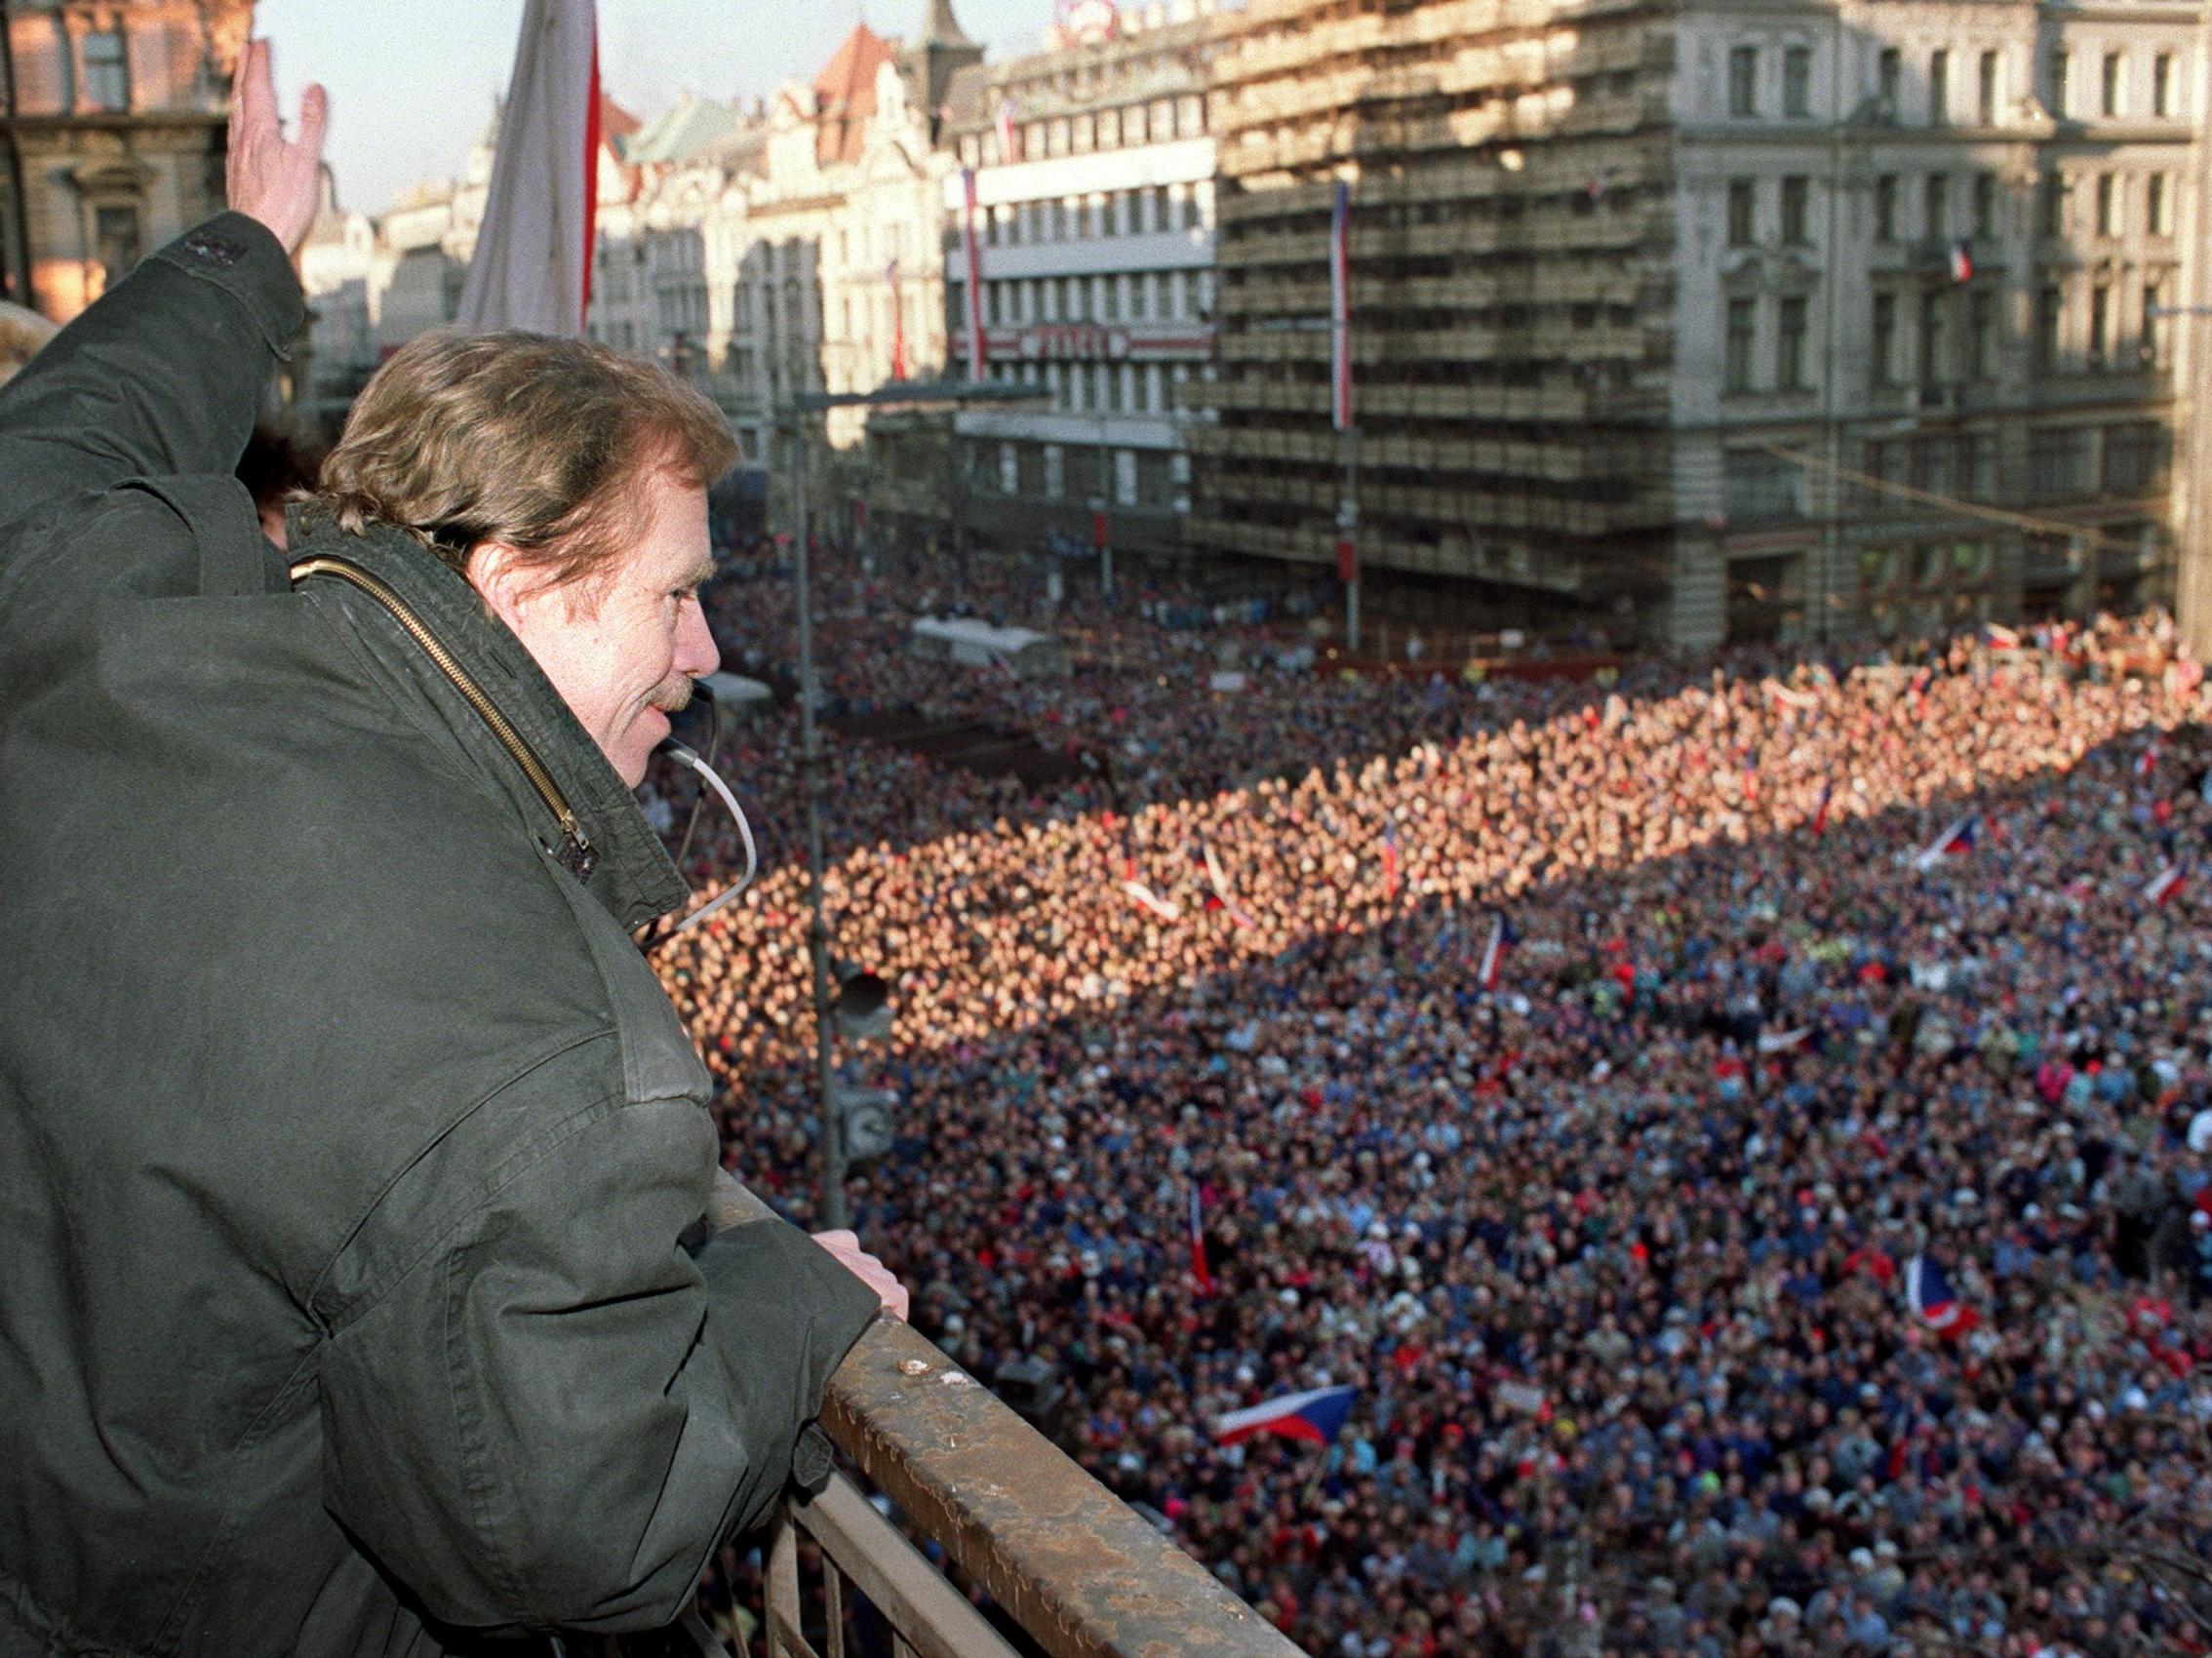 Vaclav Havel, a dissident playwright and leading member of the Czechoslovak opposition Civic Forum, waves to the crowd of thousands of demonstrators gathered on Prague’s Wenceslas Square on 10 December 1989, celebrating the communist capitulation